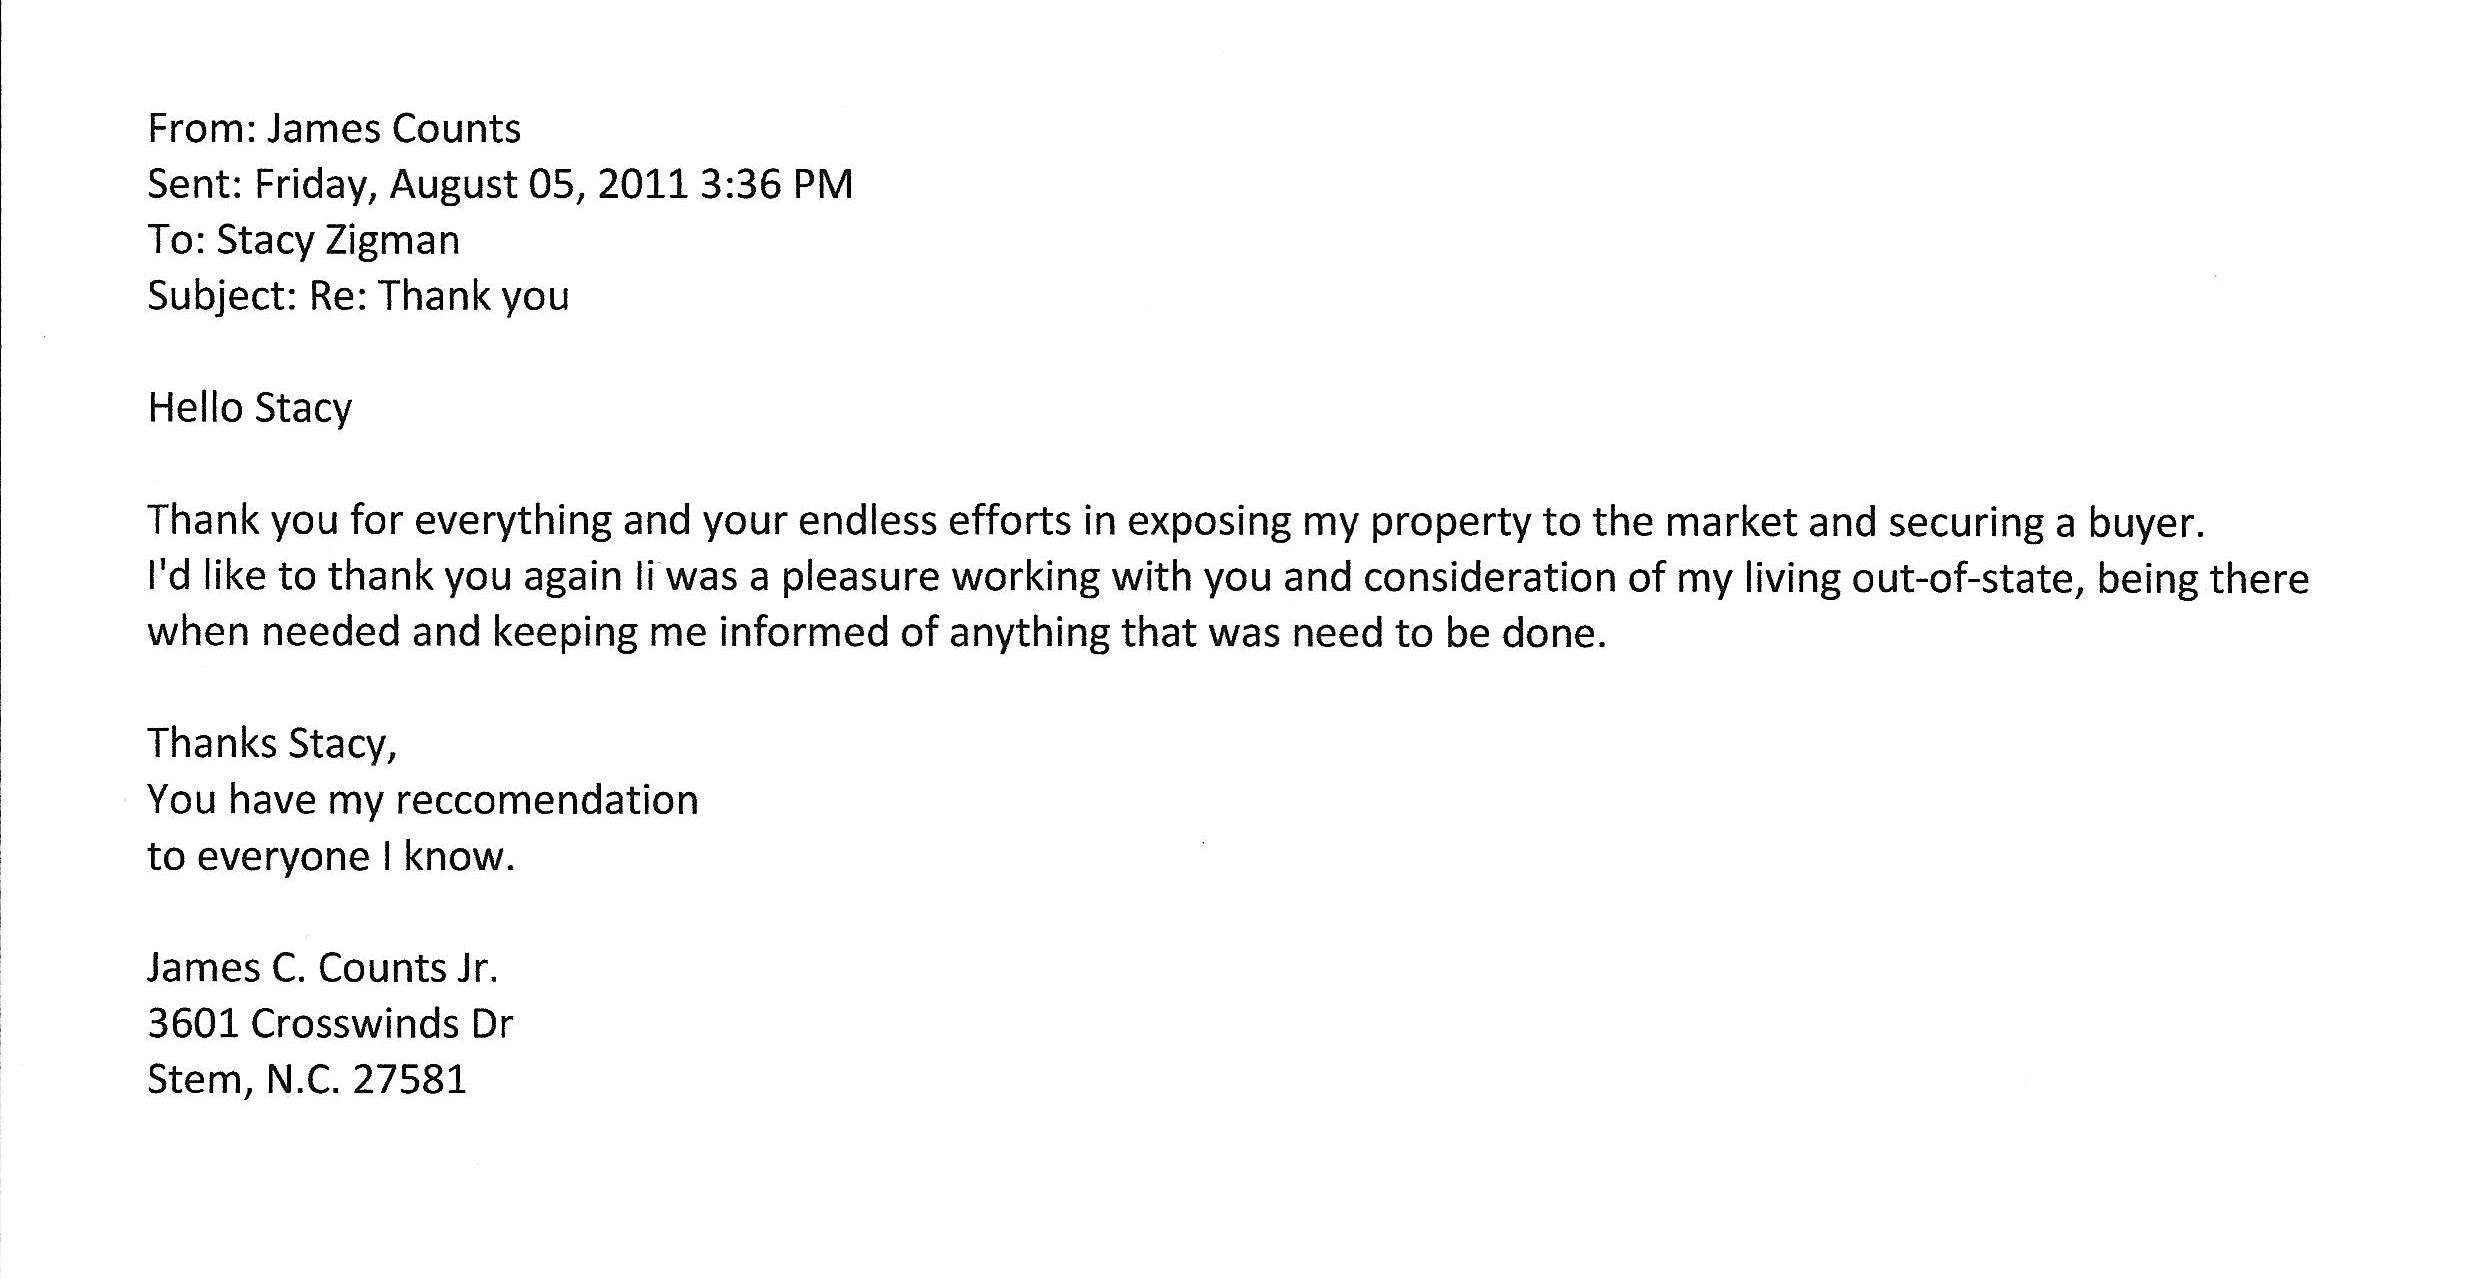 James Counts testimonial letter which reads: From: James Counts Sent: Friday, August 05, 2011 3:36 PM To: Stacy Zigman Subject: Re: Thank you Hello Stacy Thank you for everything and your endless efforts in exposing my property to the market and securing a buyer. I'd like to thank you again li was a pleasure working with you and consideration of my living out-of-state, being there when needed and keeping me informed of anything that was need to be done. Thanks Stacy, You have my reccomendation to everyone I know. James C. Counts Jr. 3601 Crosswinds Dr Stem, N.C. 27581 